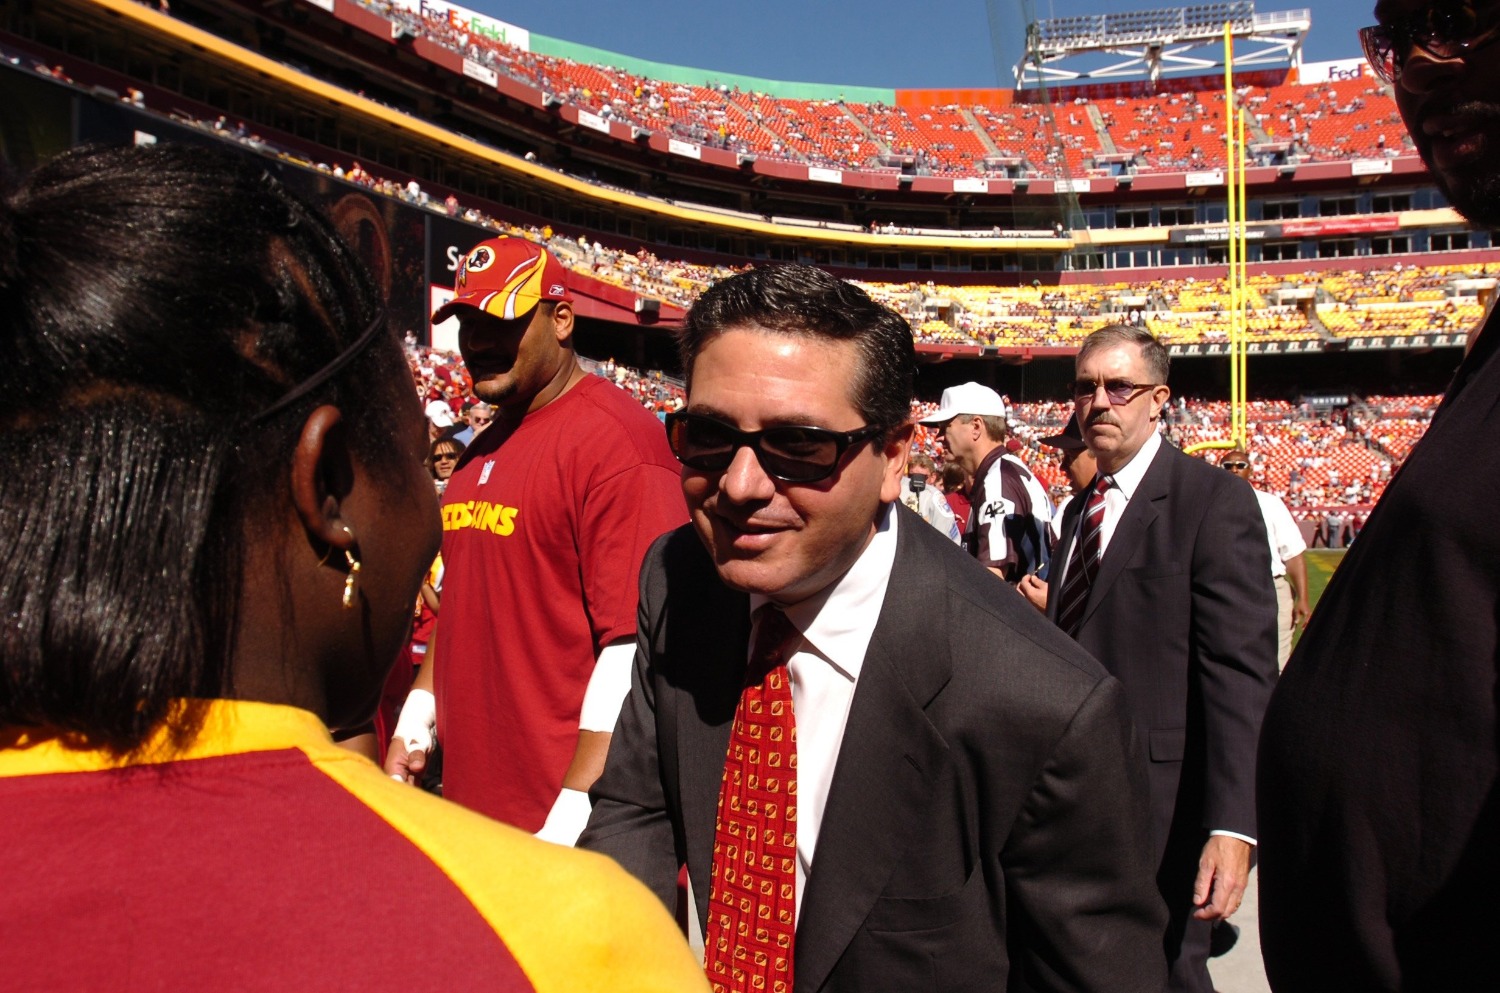 Dan Snyder and the Washington Redskins made a historical hire they desperately needed in light of the sexual harassment scandal.